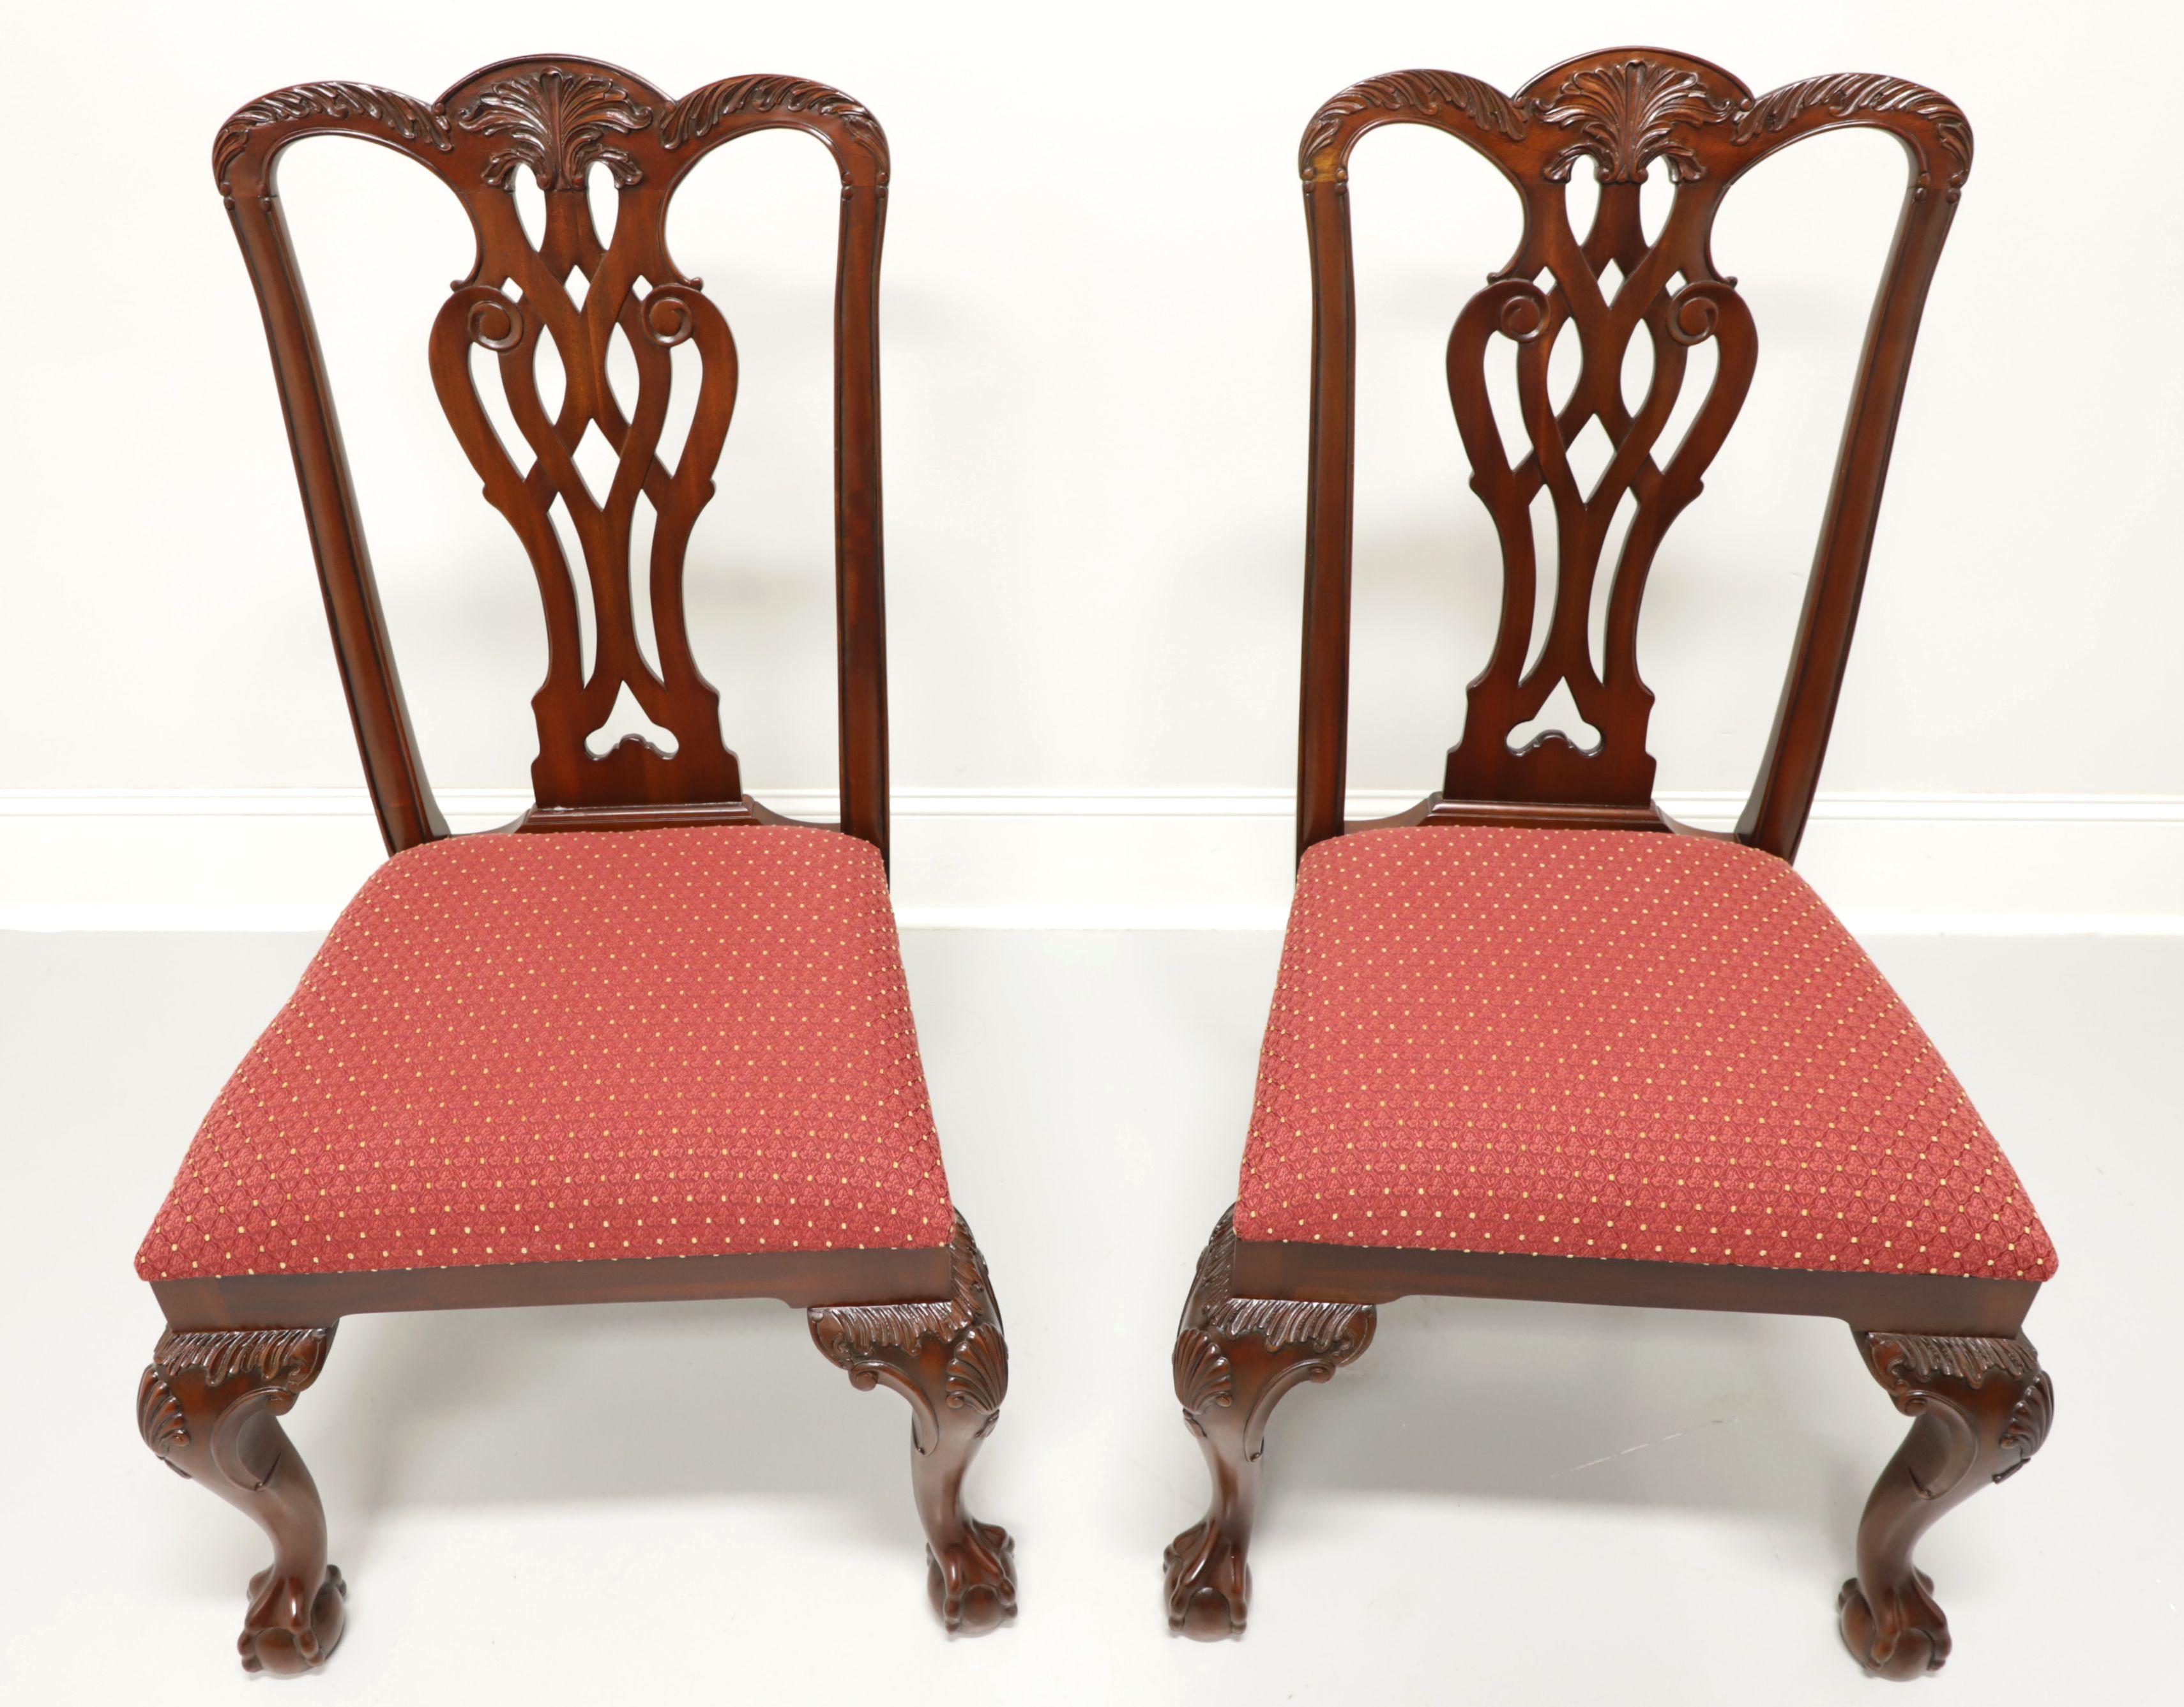 A pair of Georgian style dining side chairs by Maitland Smith. Solid mahogany with carved crest rails, carved back rests, red & gold color fabric upholstered seats, carved fan to knees, curved legs and ball in claw feet. Made in Indonesia, in the